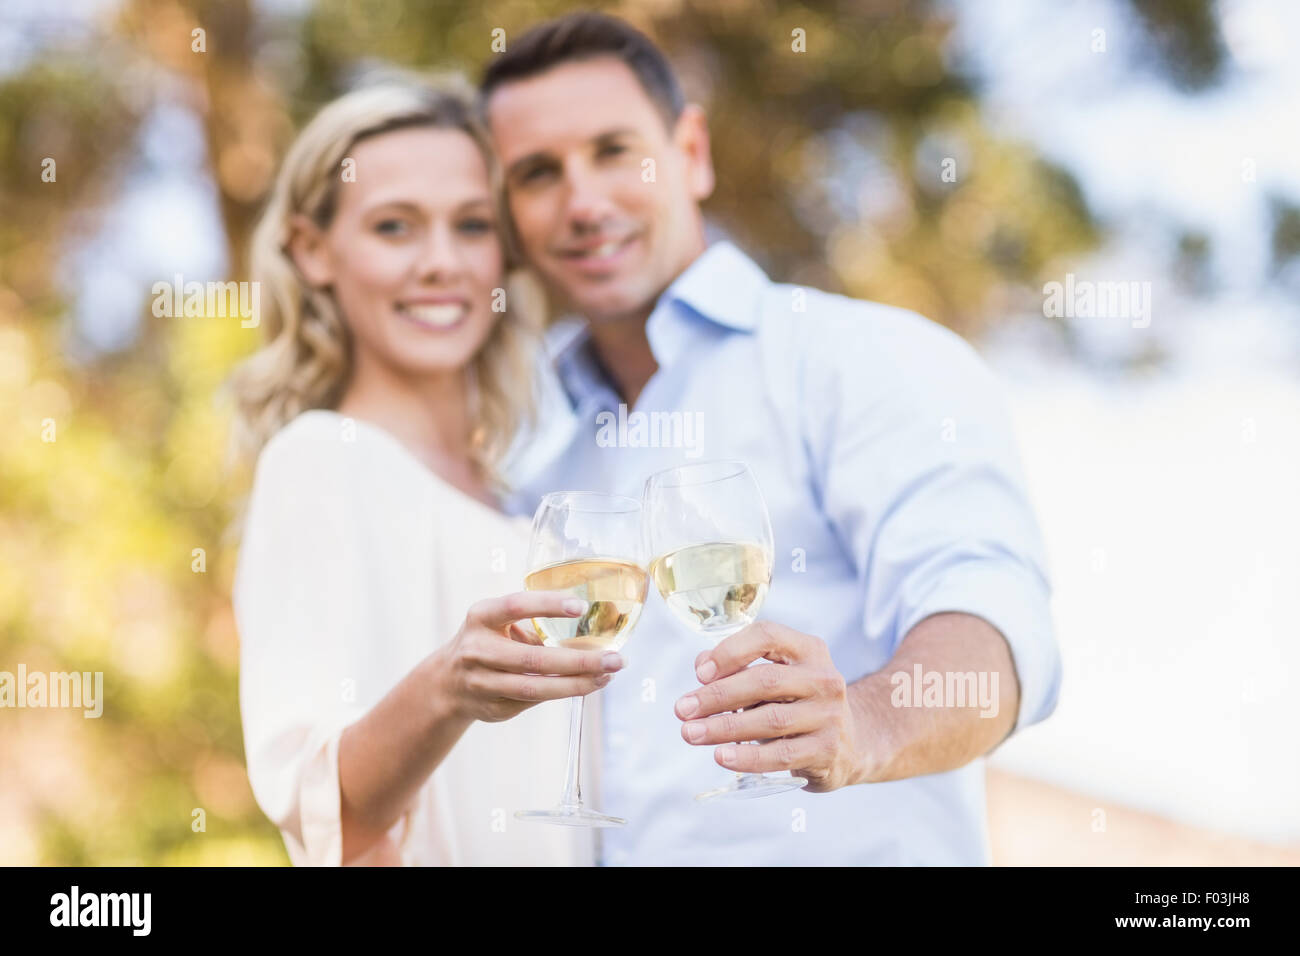 Portrait of smiling couple embracing and toasting with wineglass Stock Photo